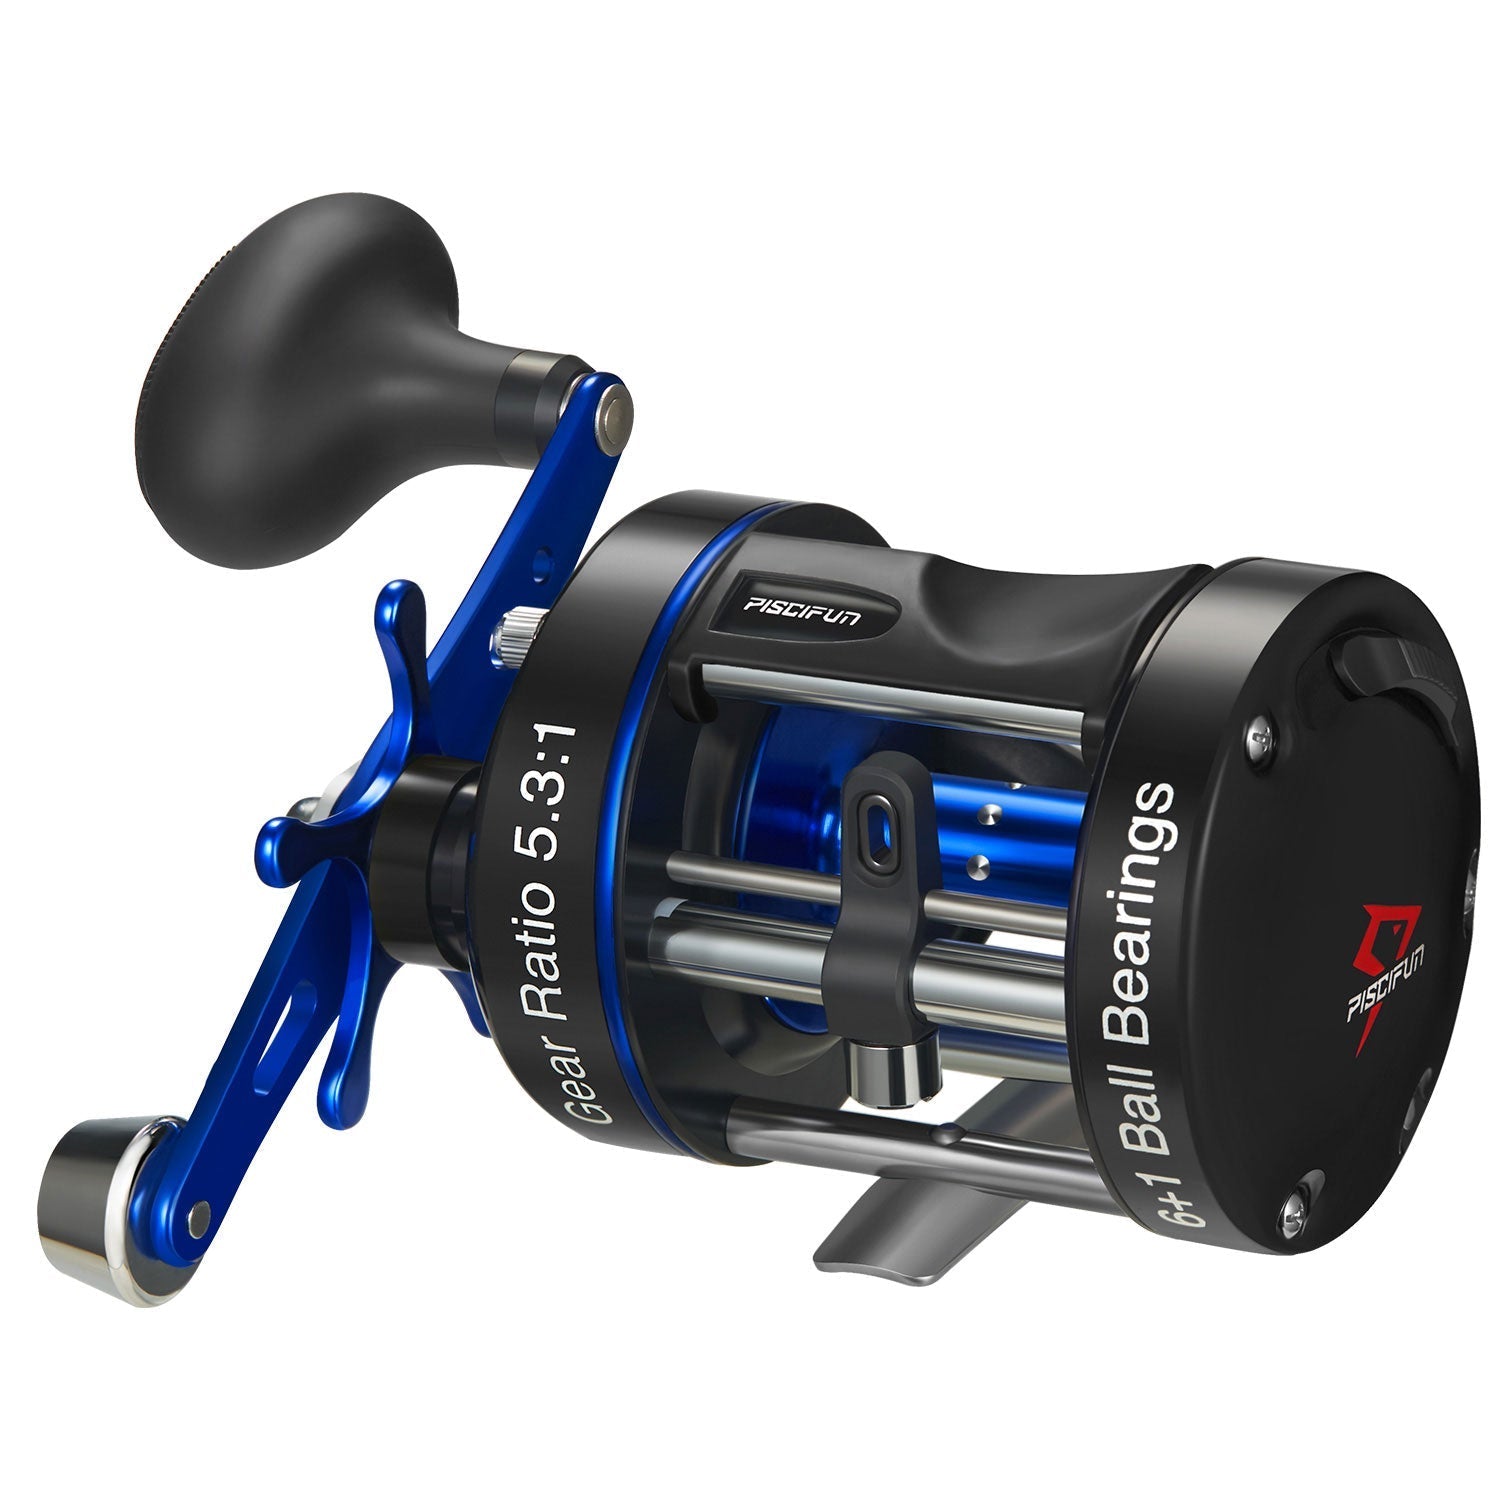 New Arrival Round Baitcasting Baitcasting Fishing Reels Right Handed For  Saltwater Fishing From Bandala, $40.81